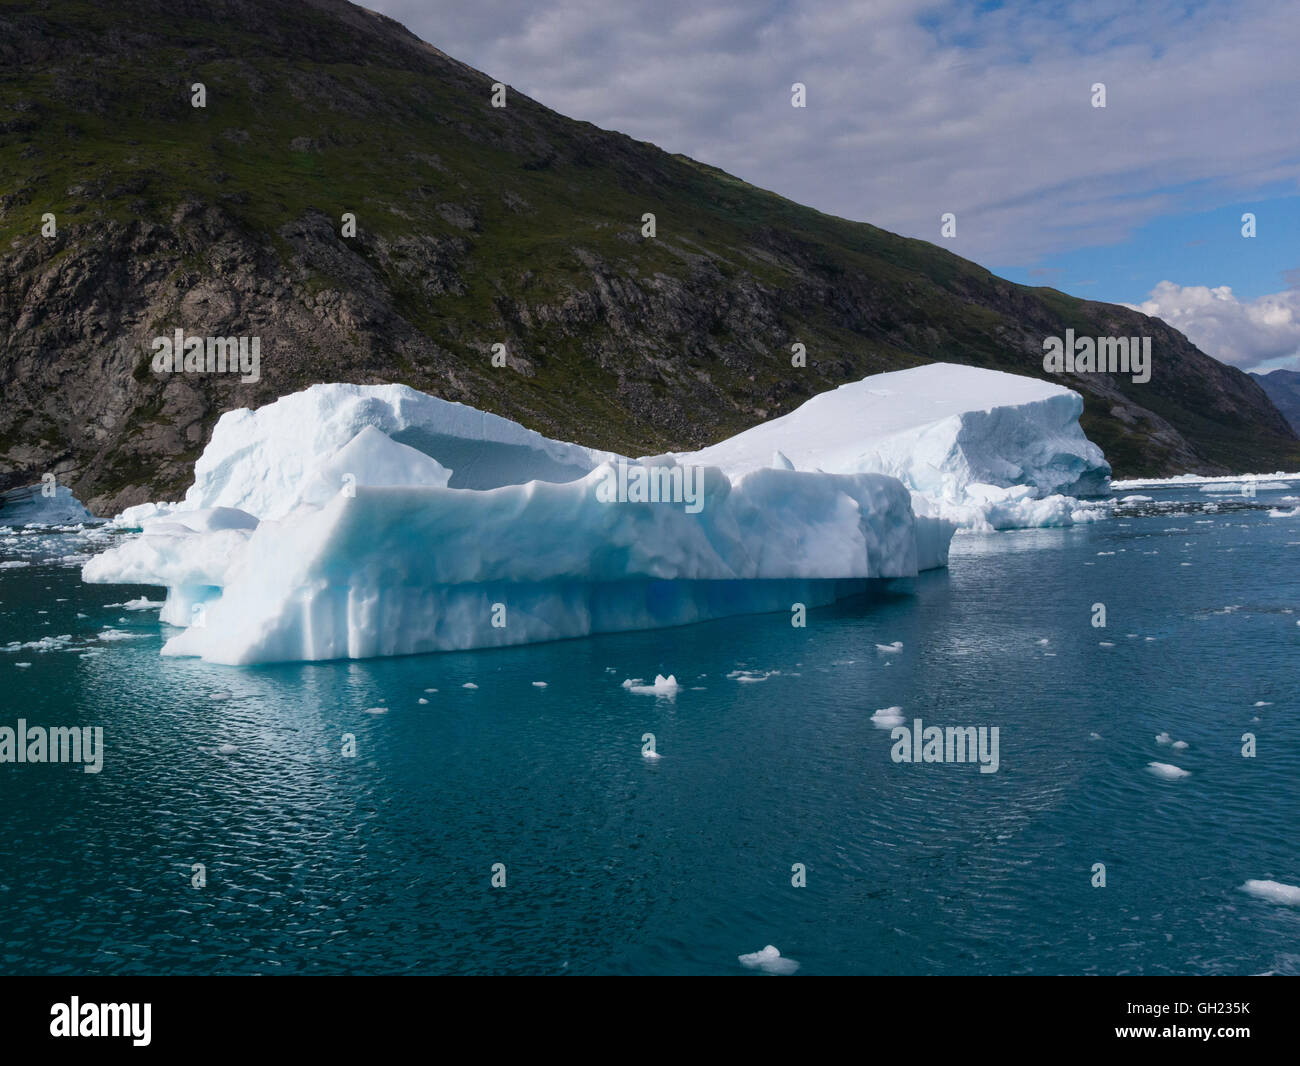 Icebergs Qooroq Ice Fjord fed from Greenland Ice Sheet glacier Tunulliarfik Fjord Southern Greenland a spectacular natural view of awesome beauty Stock Photo